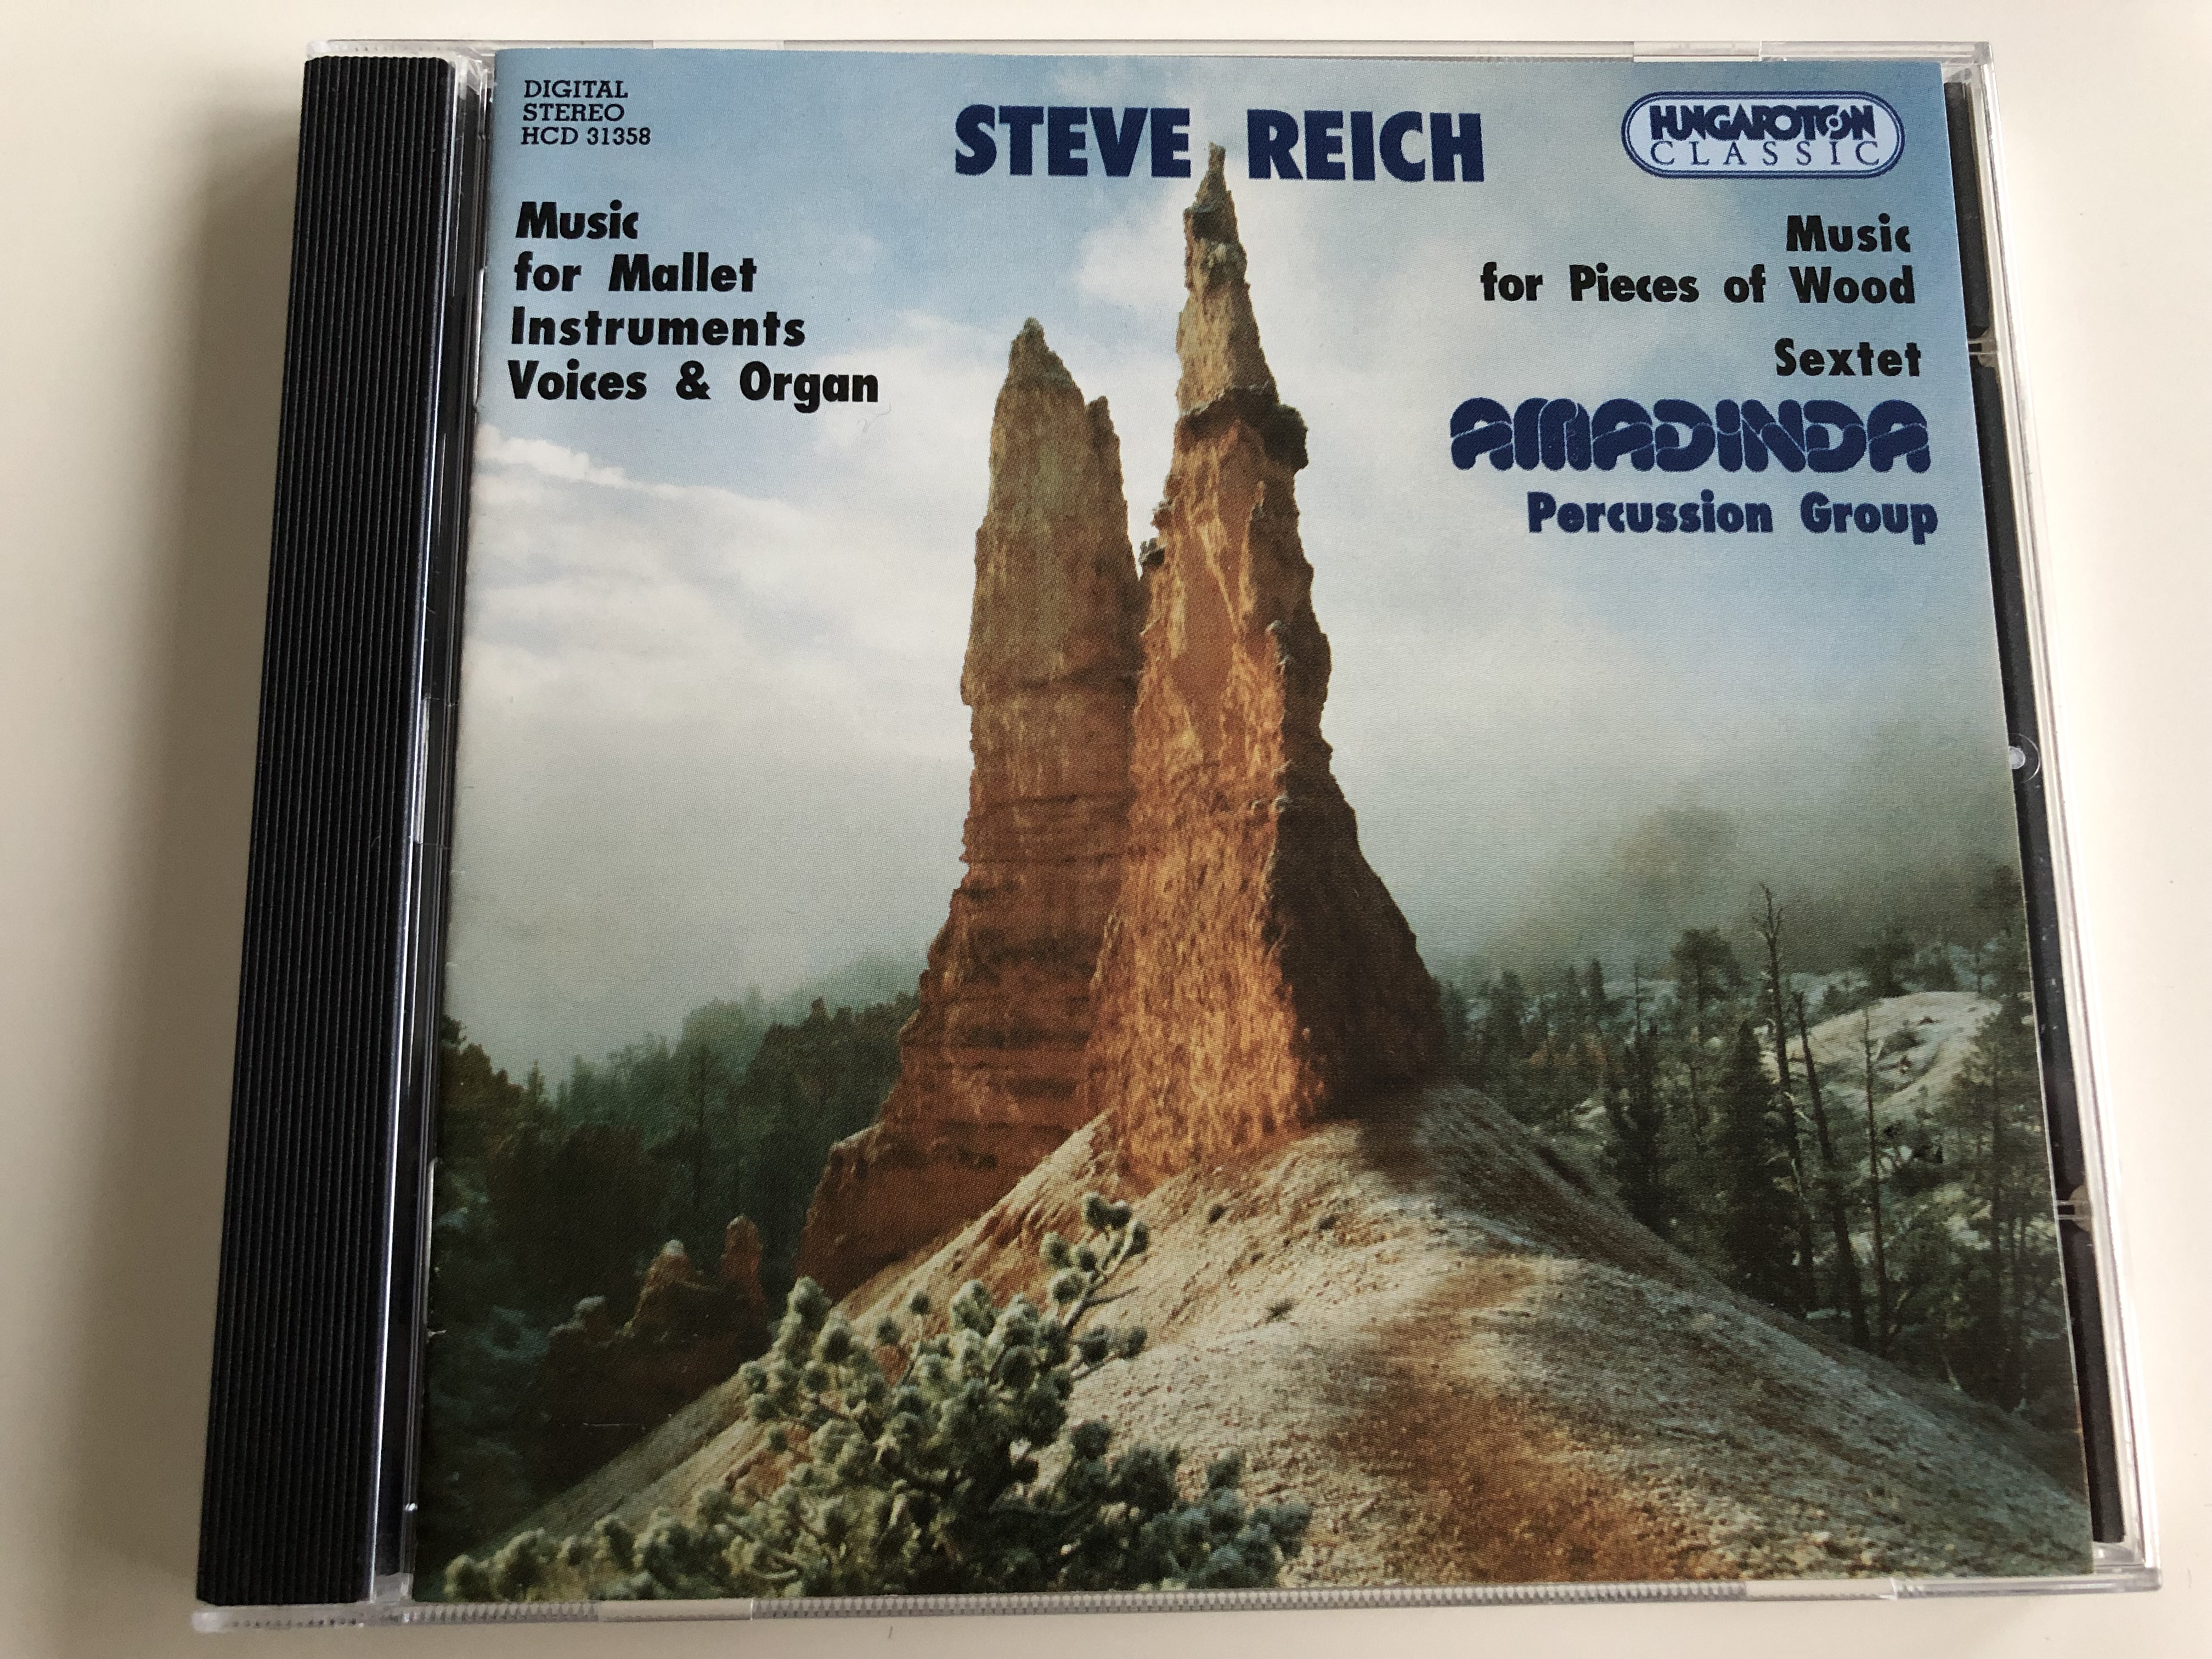 steve-reich-music-for-mallet-instruments-voices-and-organ-music-for-pieces-of-wood-sextet-amadinda-percussion-group-audio-cd-1995-hungaroton-classic-hcd-31358-1-.jpg